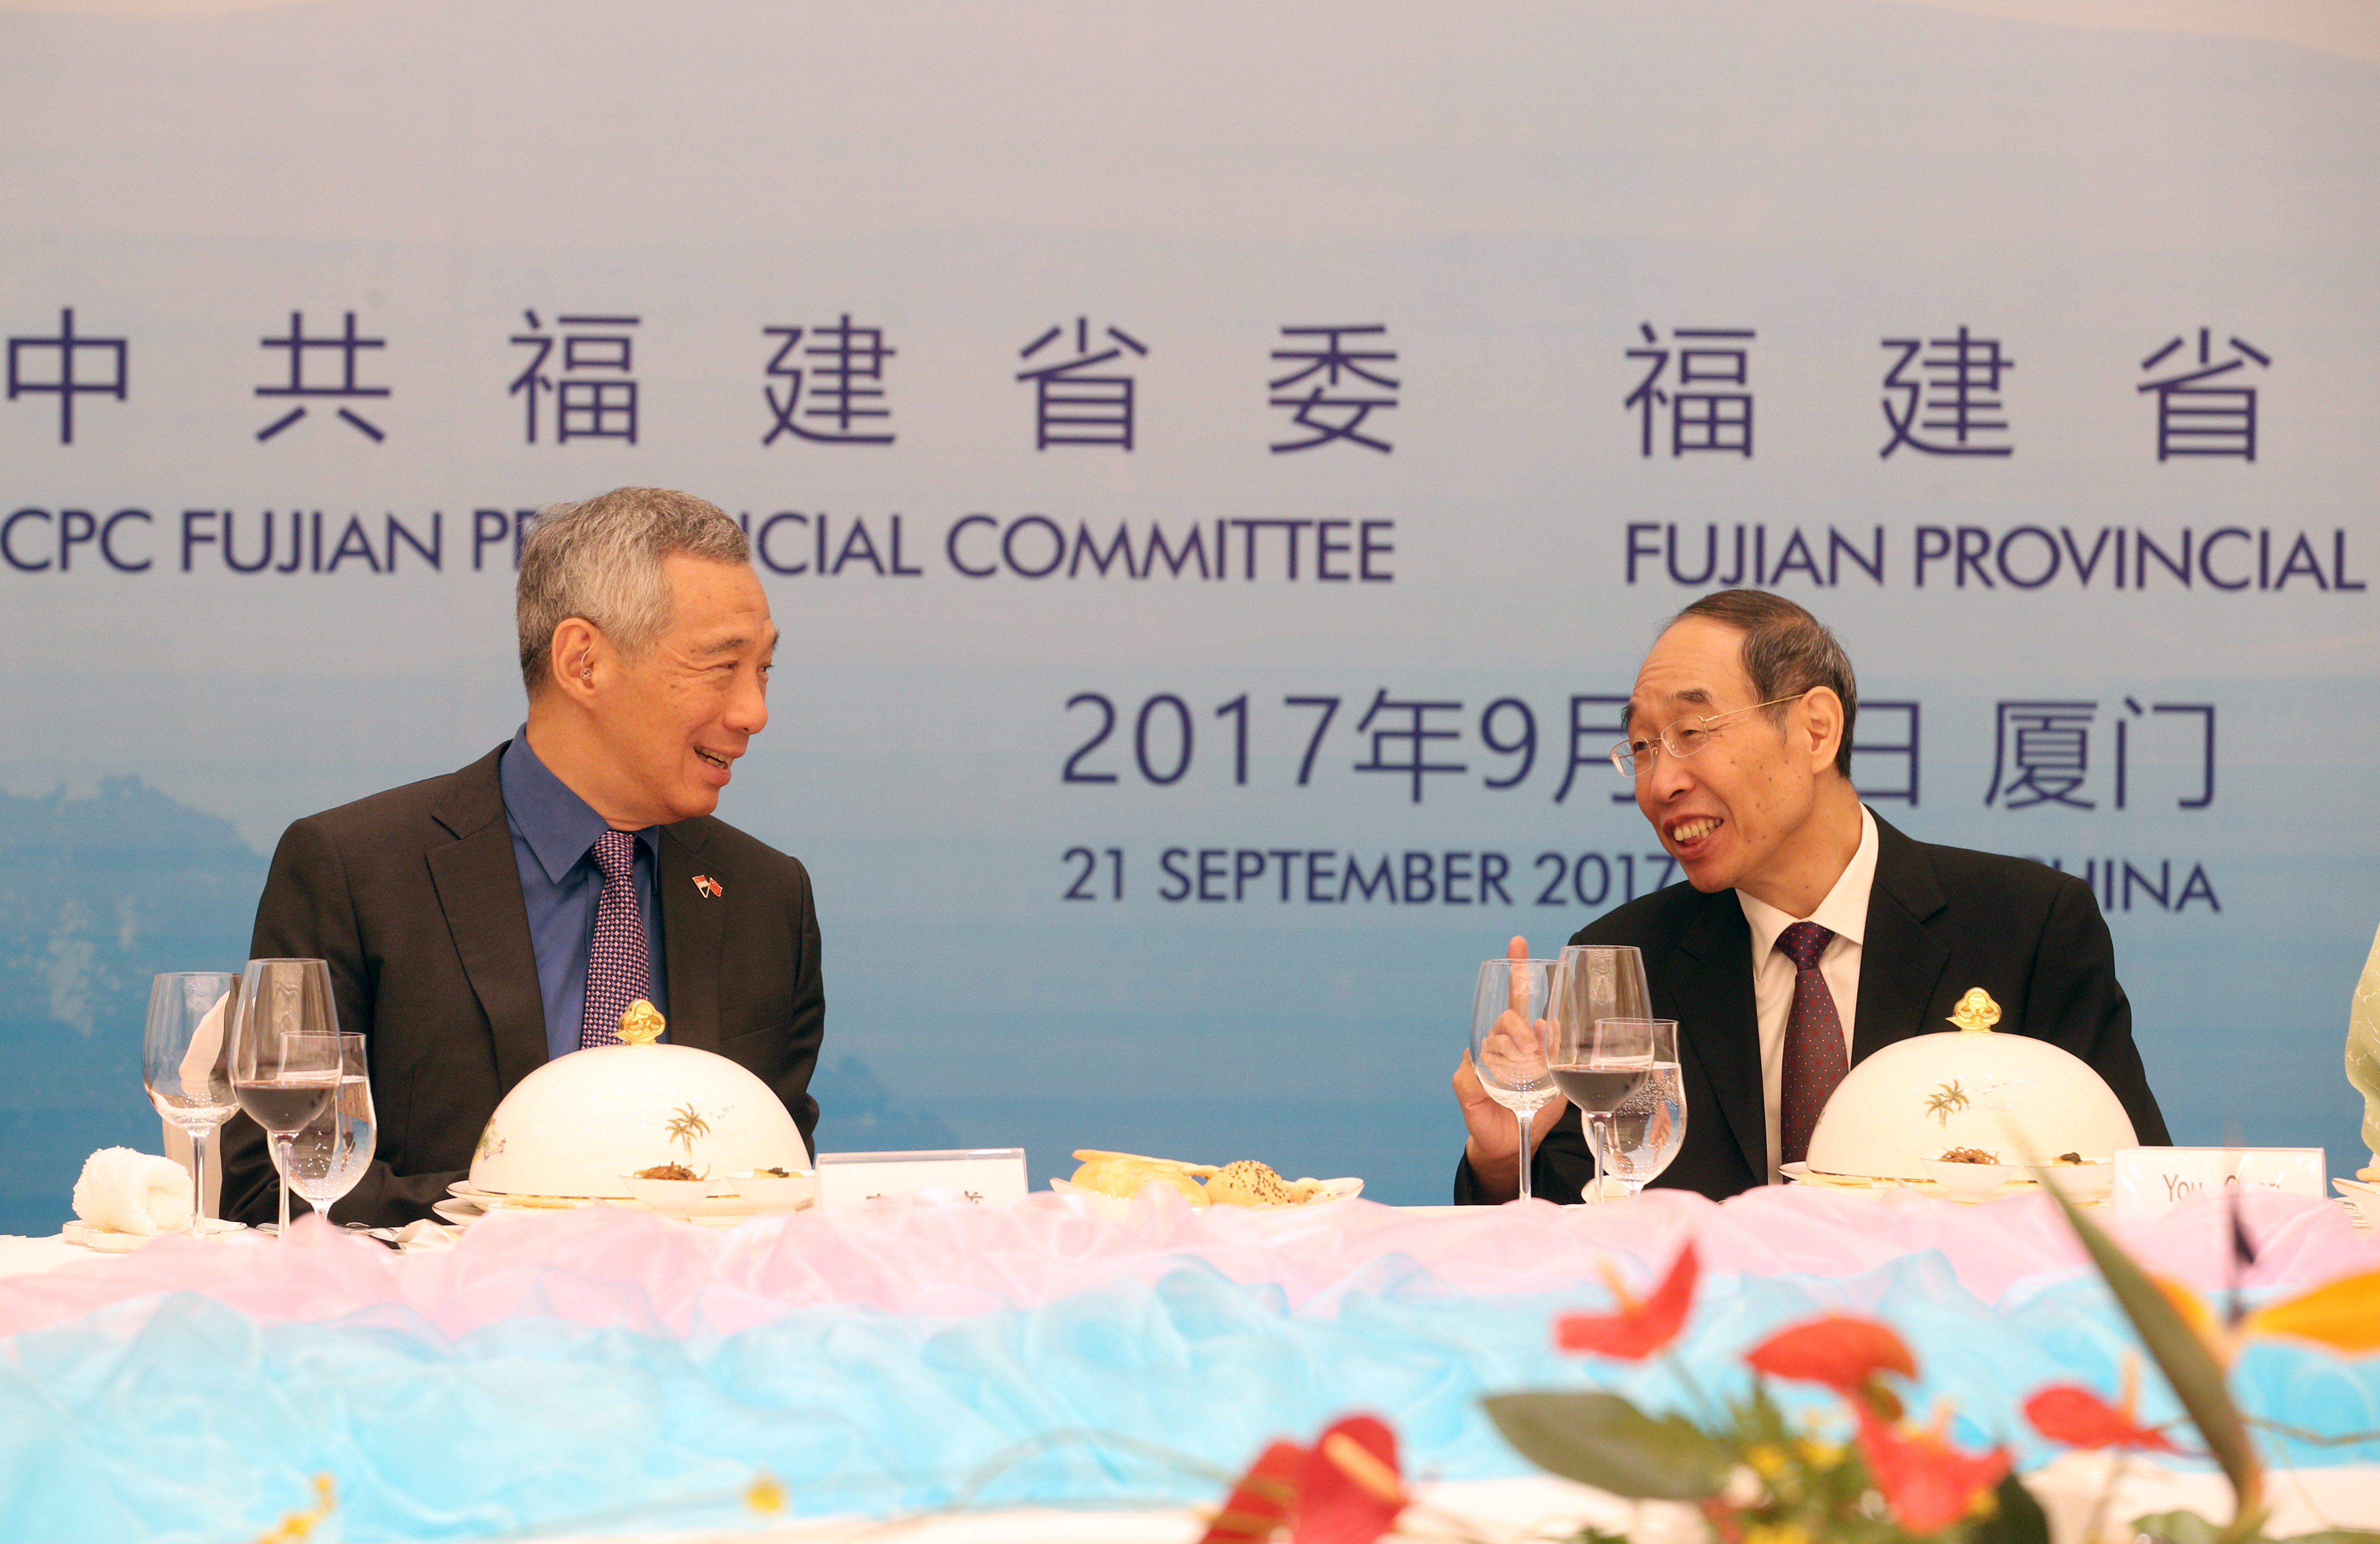 PM Lee Hsien Loong hosted to lunch by Fujian Party Secretary You Quan in Xiamen on 21 Sep 2017 (MCI Photo by Chwee)